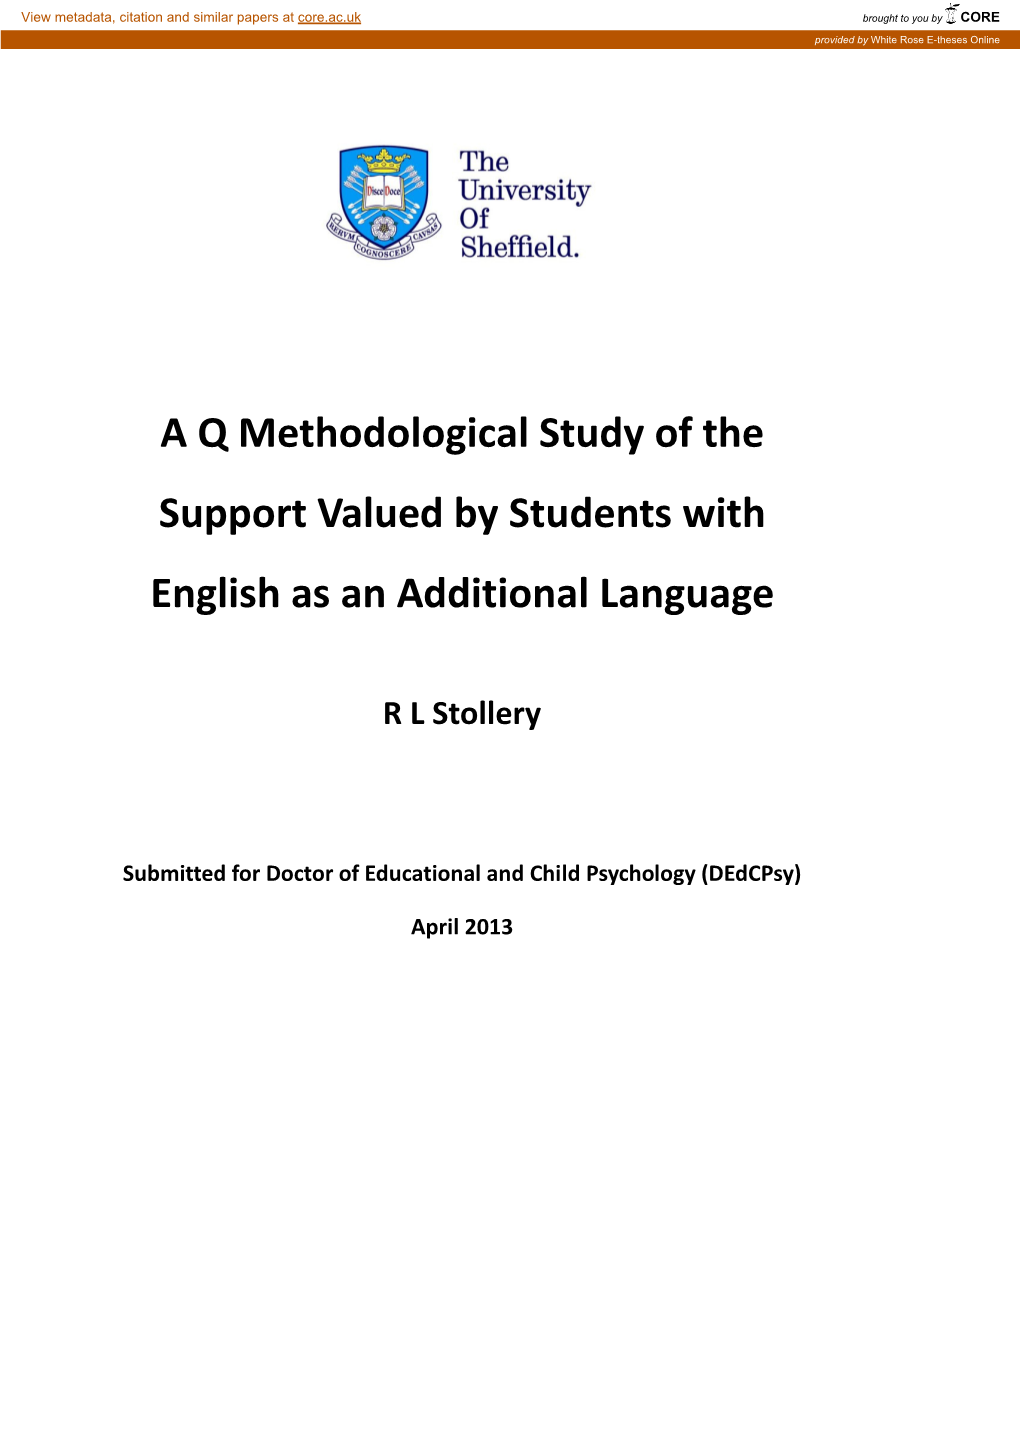 A Q Methodological Study of the Support Valued by Students with English As an Additional Language